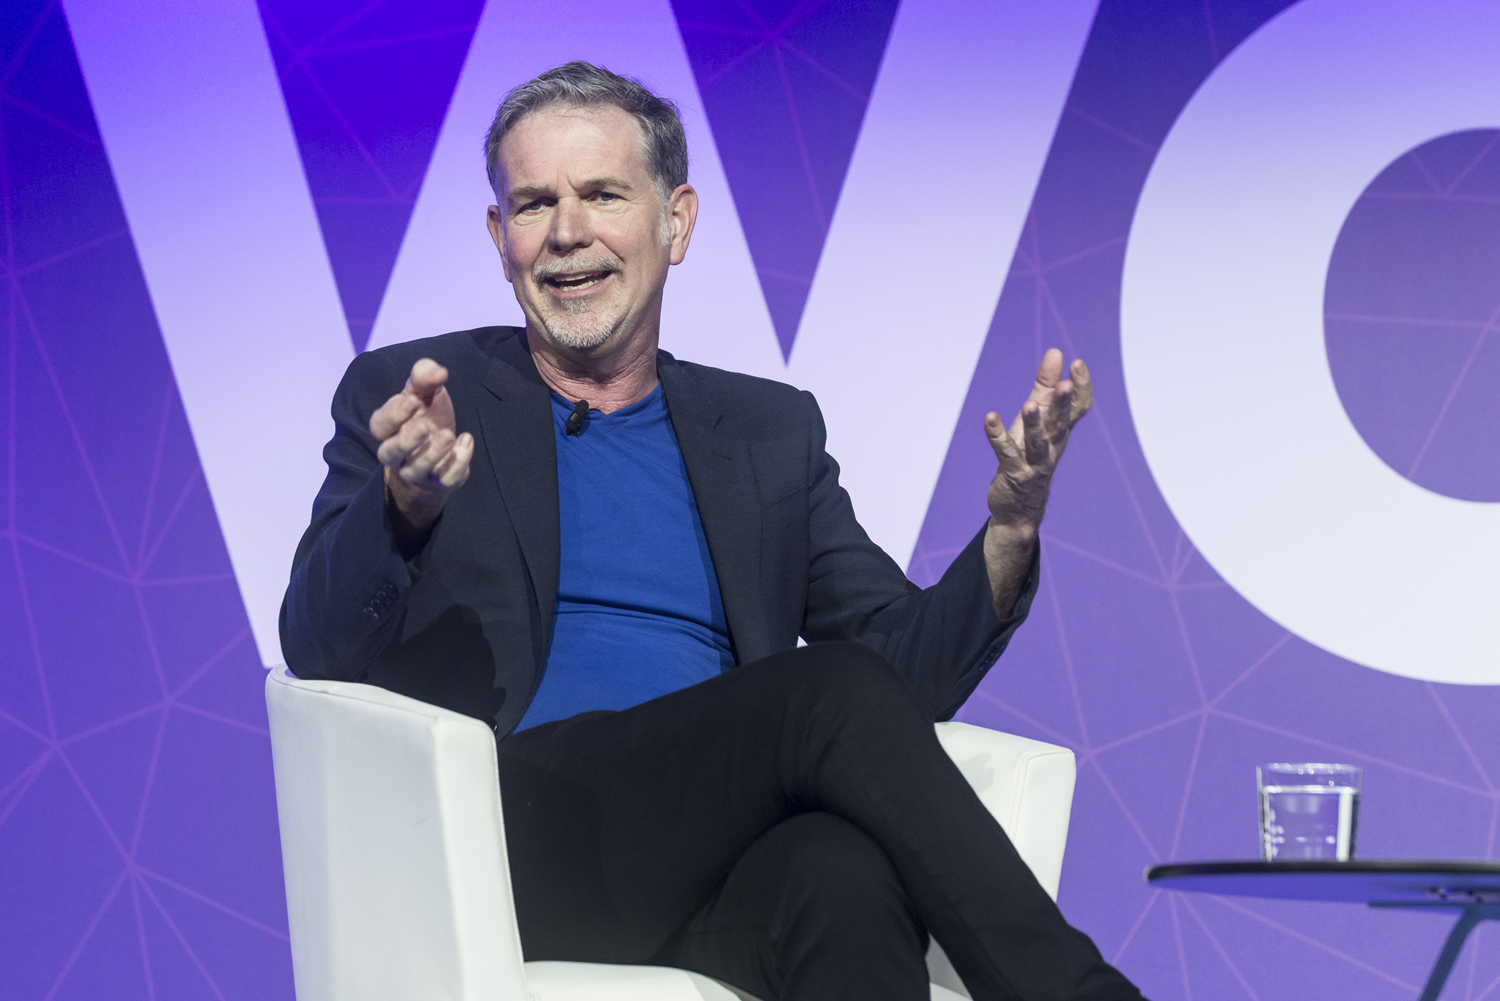 Reed Hastings, CEO, Netflix, has said the company's next 100 million customers will come from India